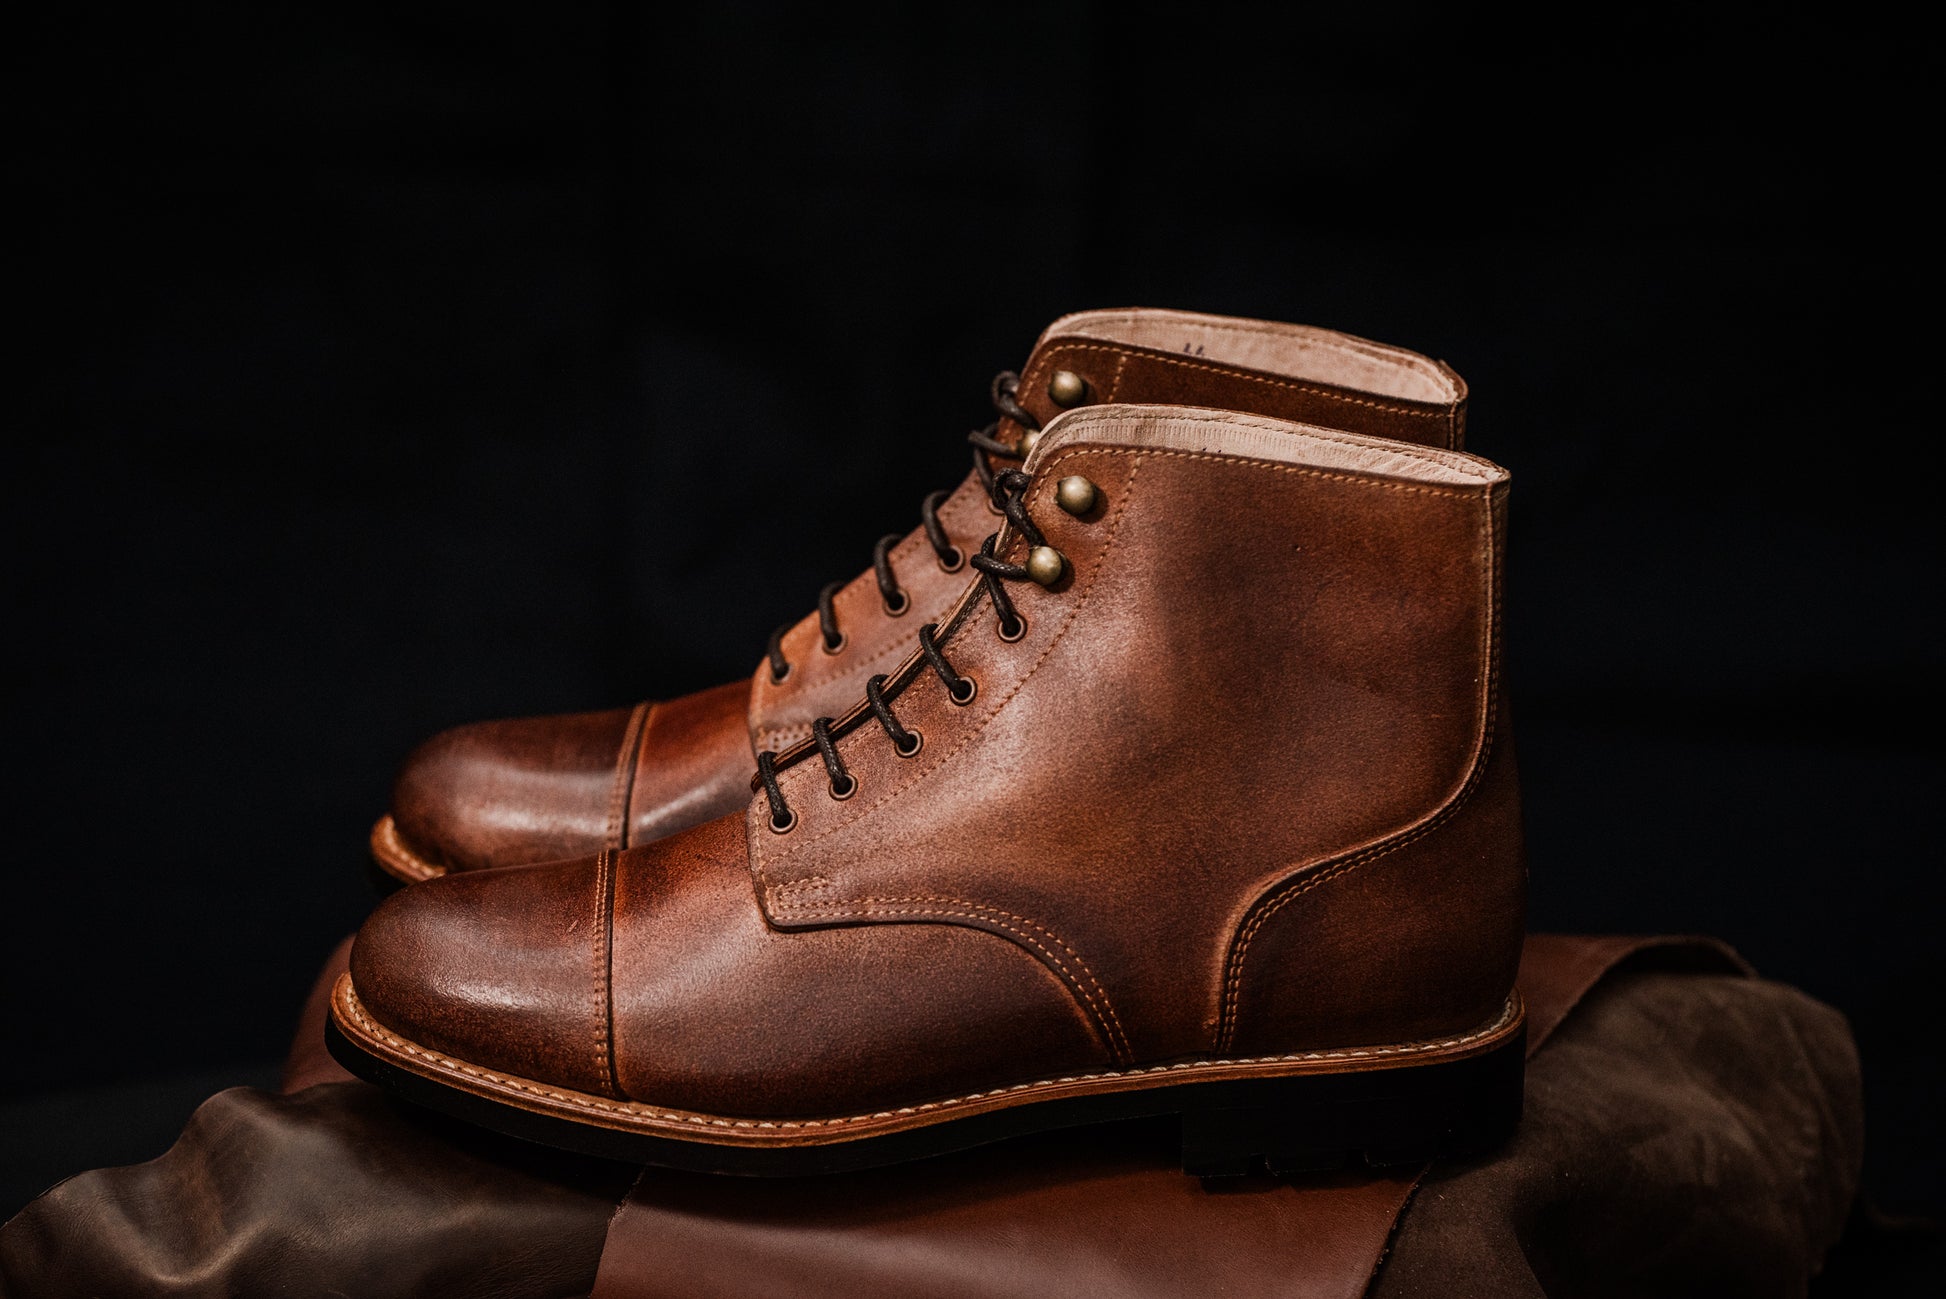 Tejo Boots Military Sole - Man Boots, Men Leather Sole with Rubber Covers, Vintage  Boots, Men Ankle Boots – OldMulla - Boots Store, Handmade By George Family